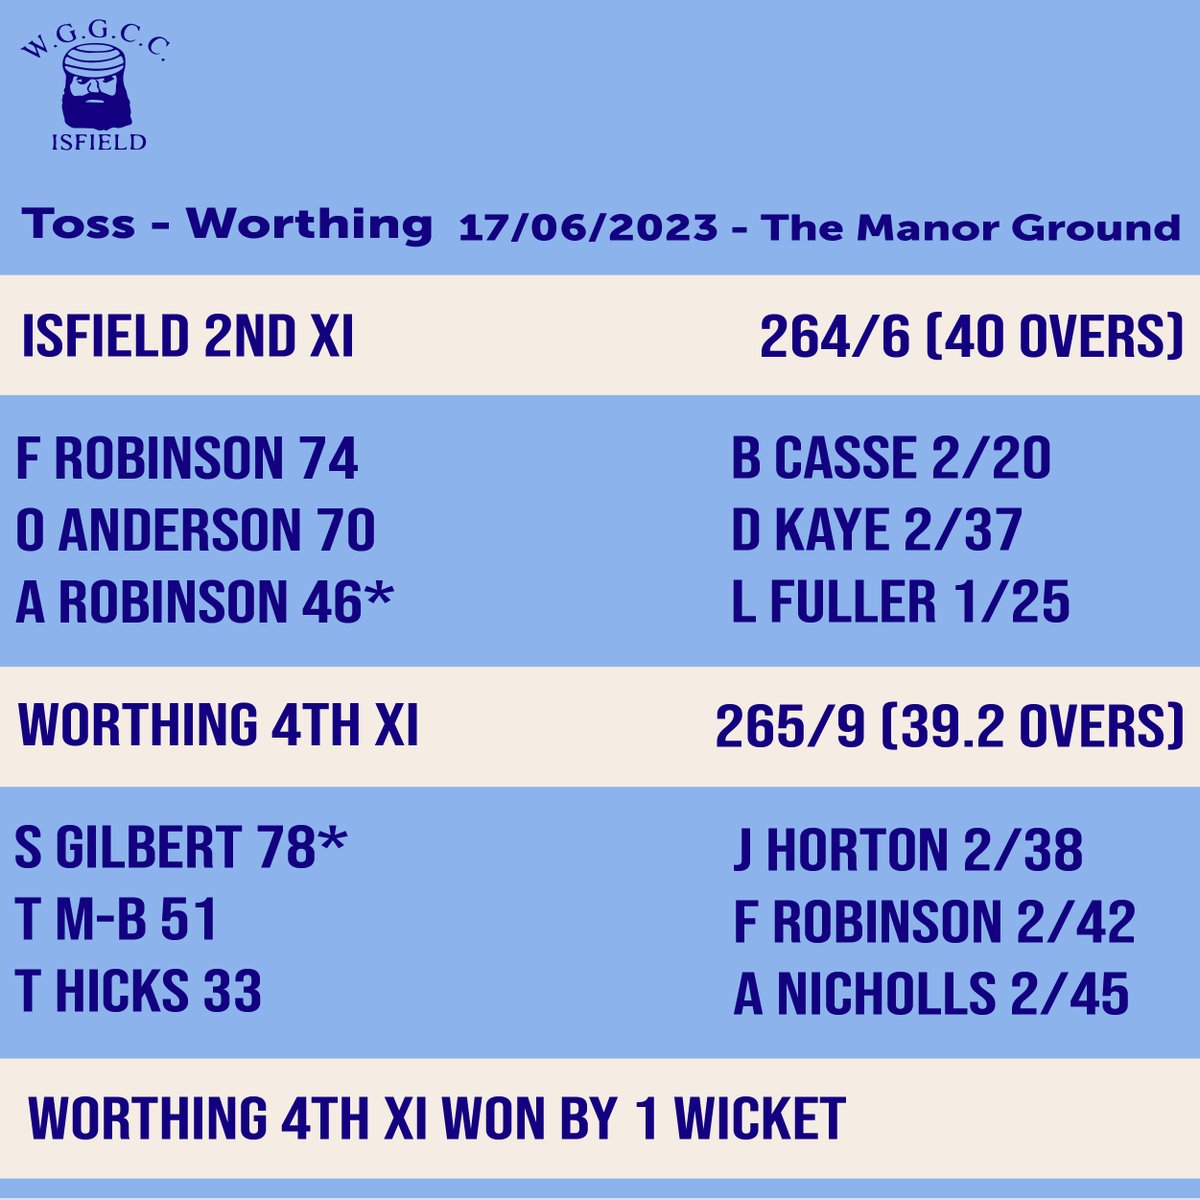 🚨 RESULTS 🚨

A fantastic weekend for the club, with the 1's picking up 30 points at Bolney and the 2's involved in a high scoring thriller at Worthing 4's.